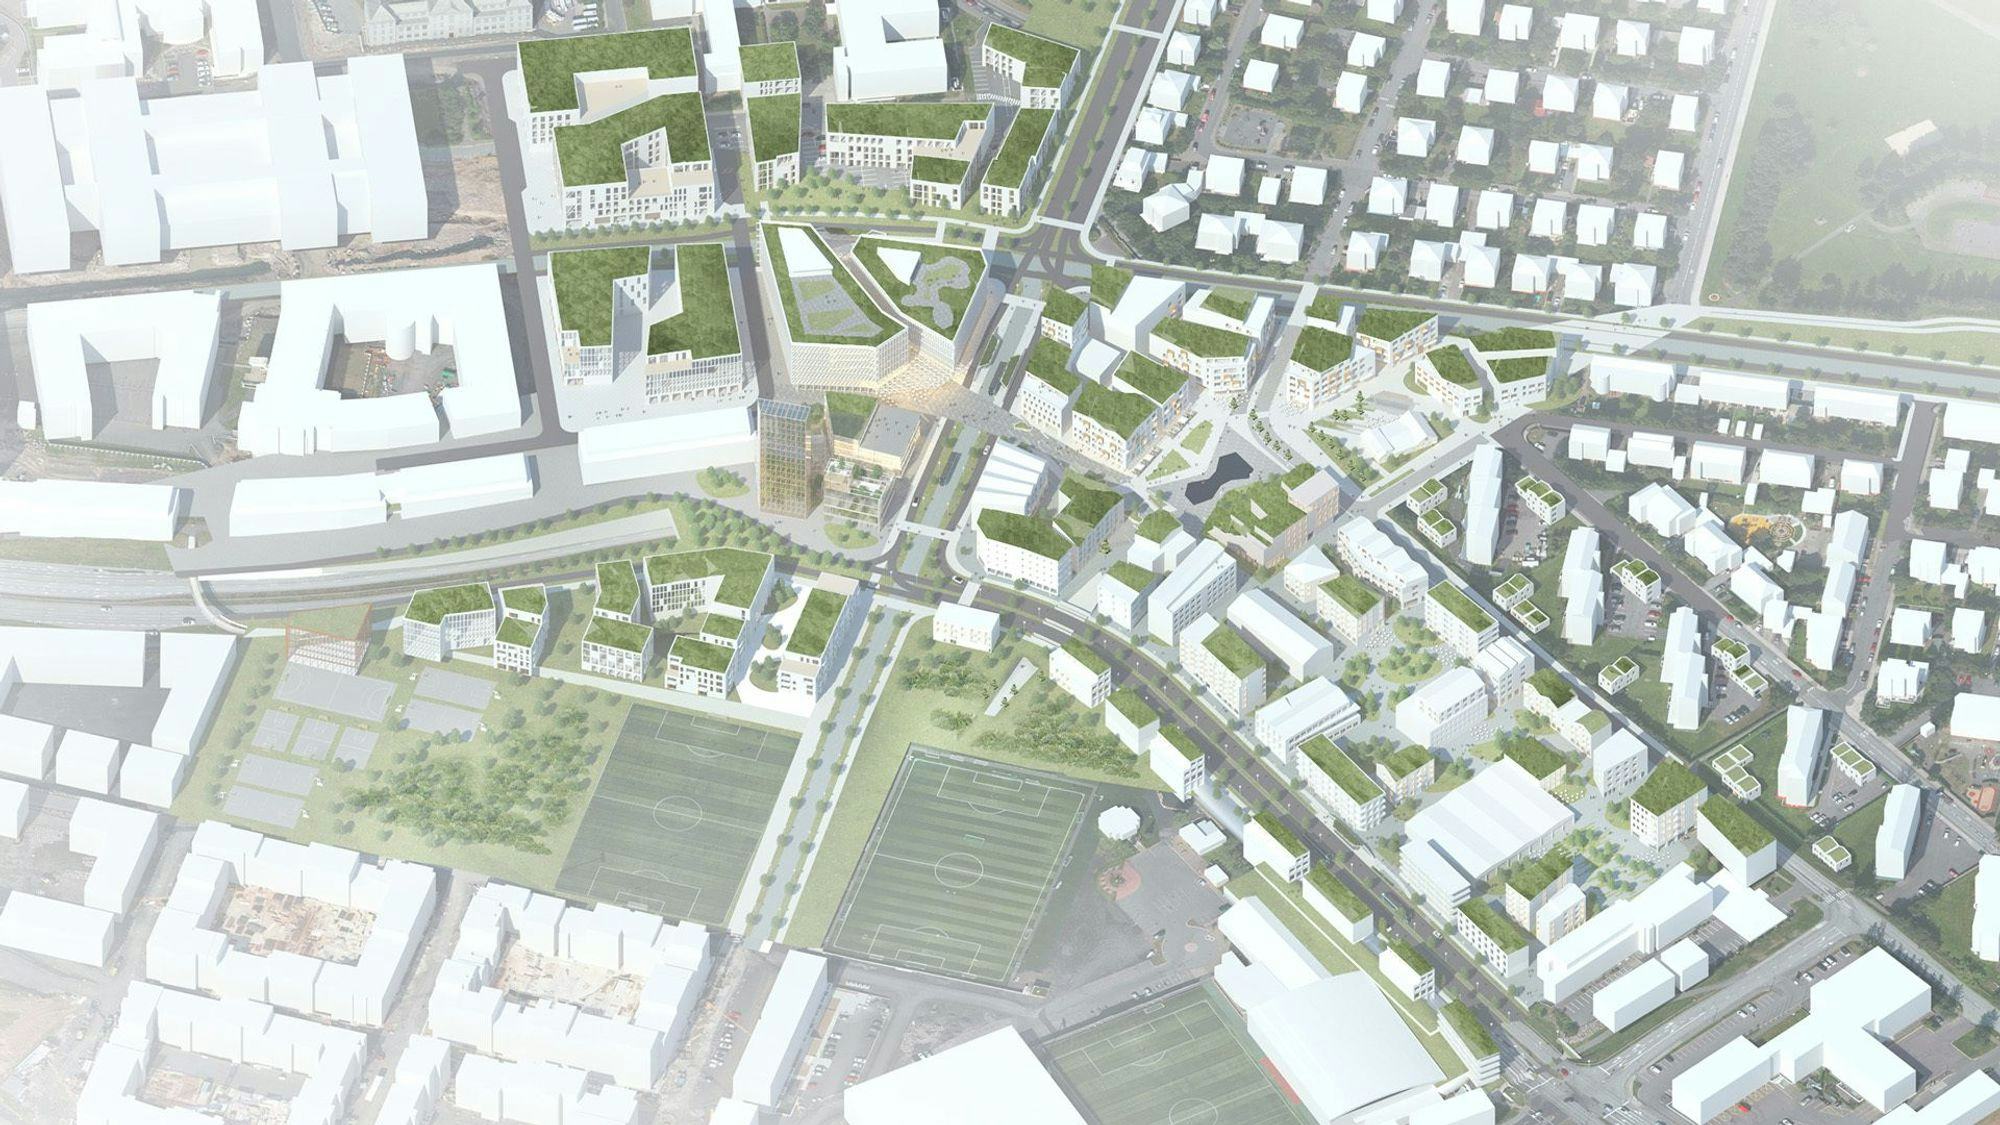 3D visualization of a city block layout with buildings and green spaces